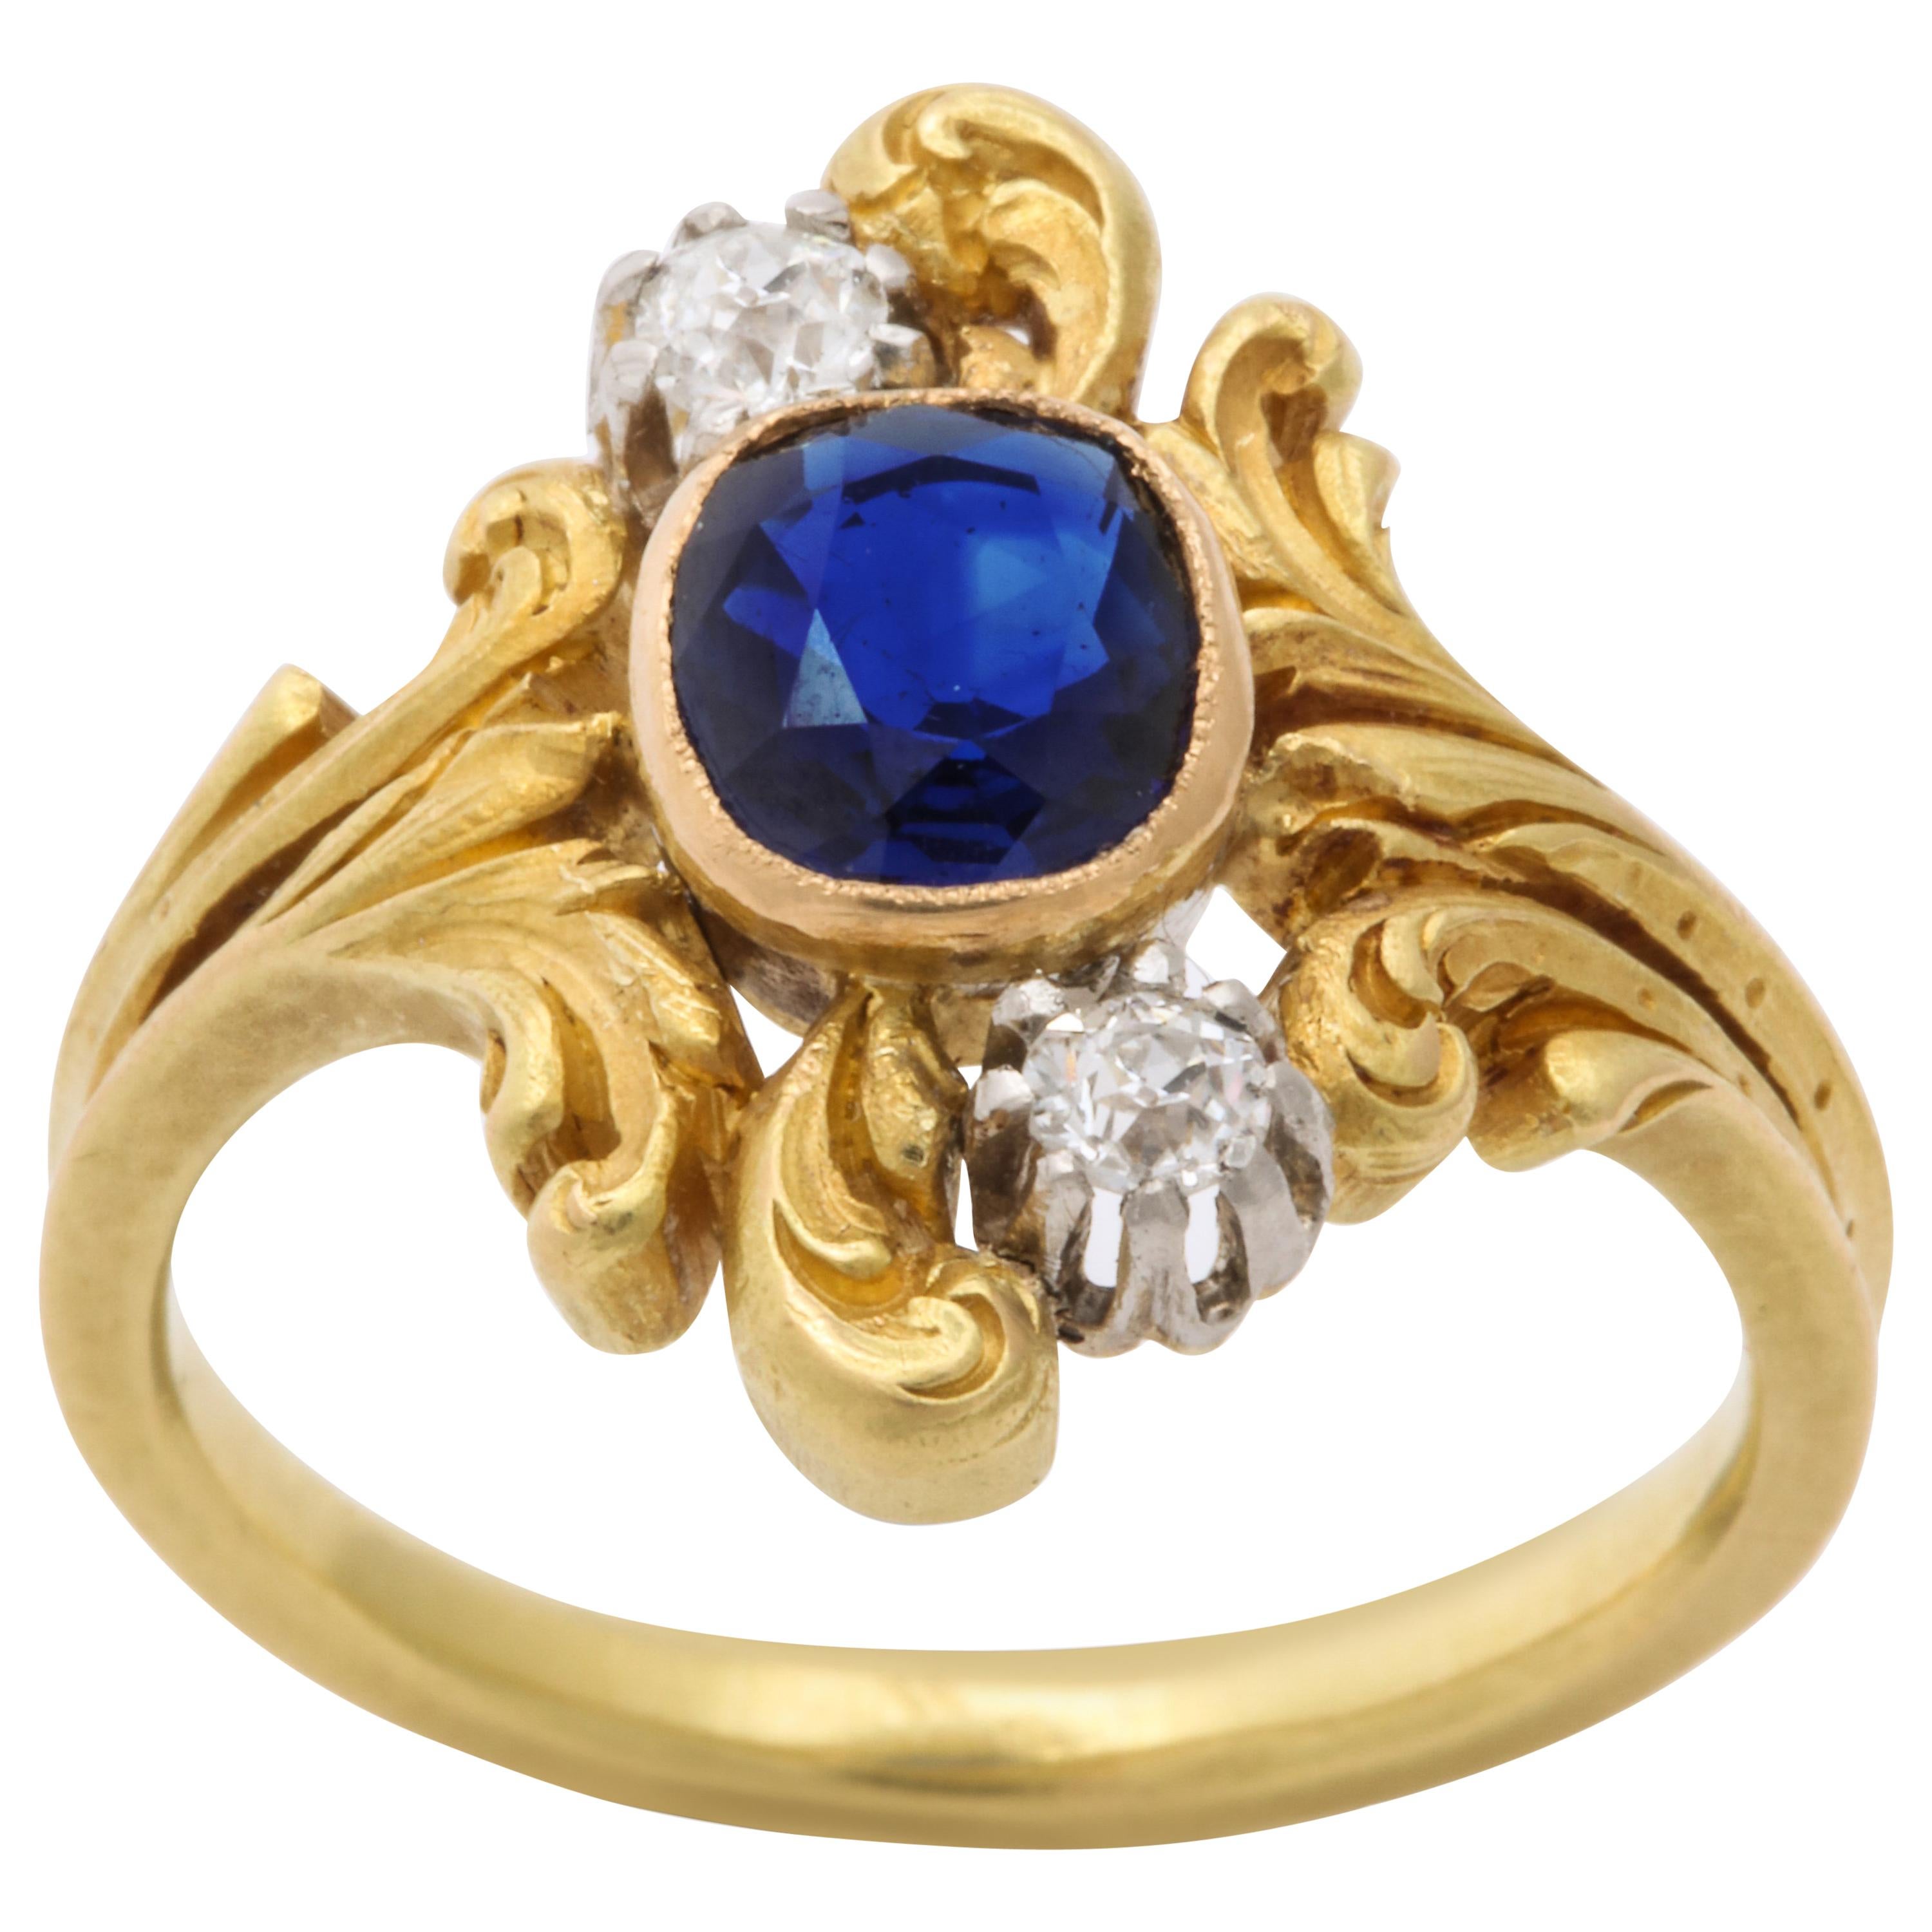 Antique Art Nouveau French Sapphire and Diamond Ring